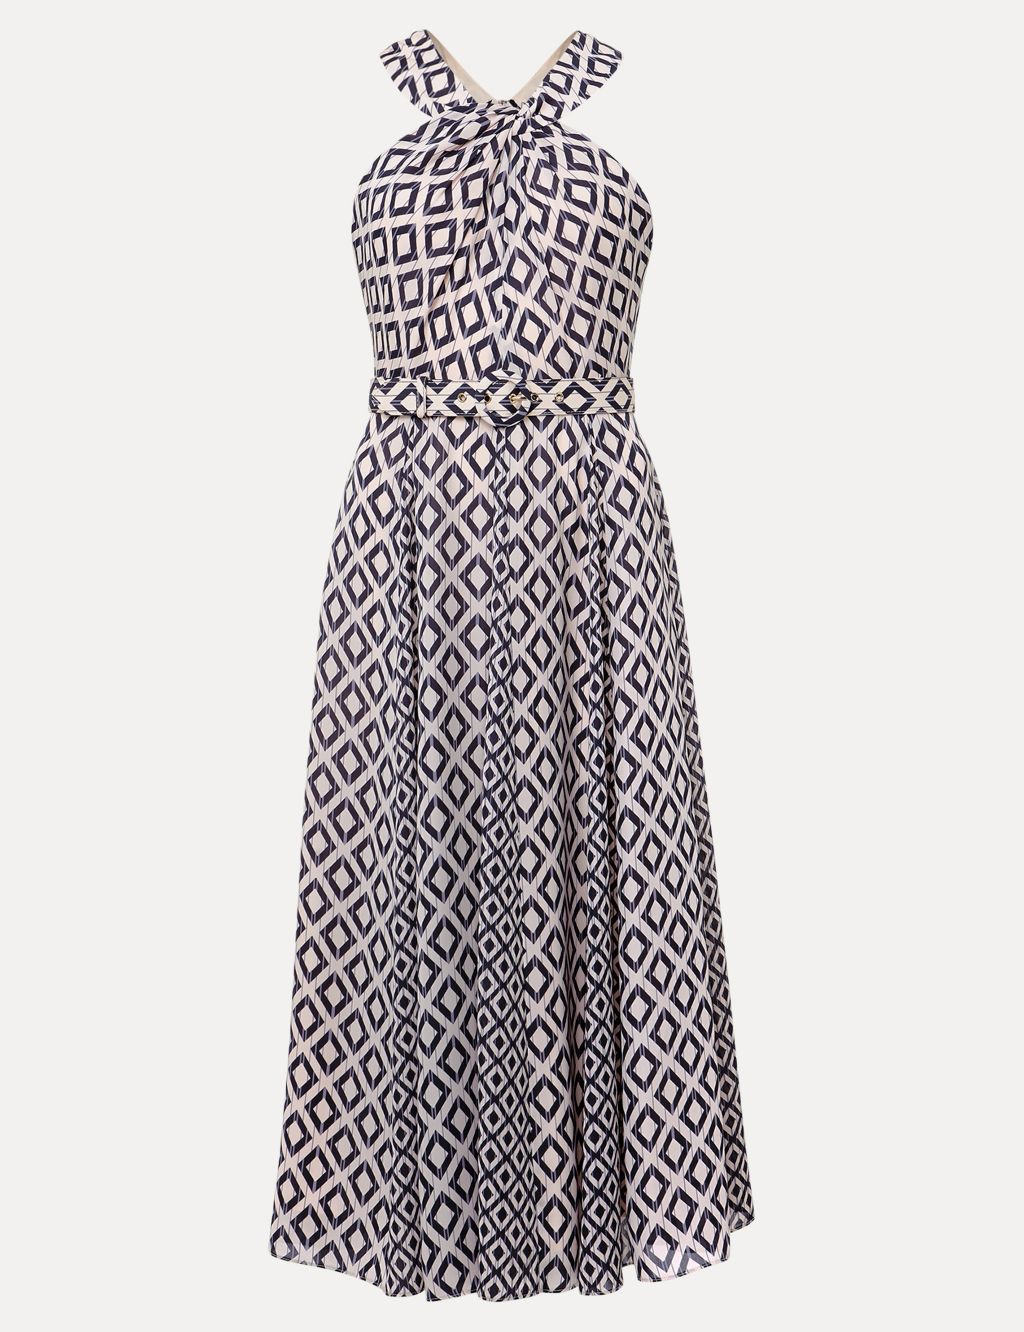 Printed Strappy Belted Midi Swing Dress image 2